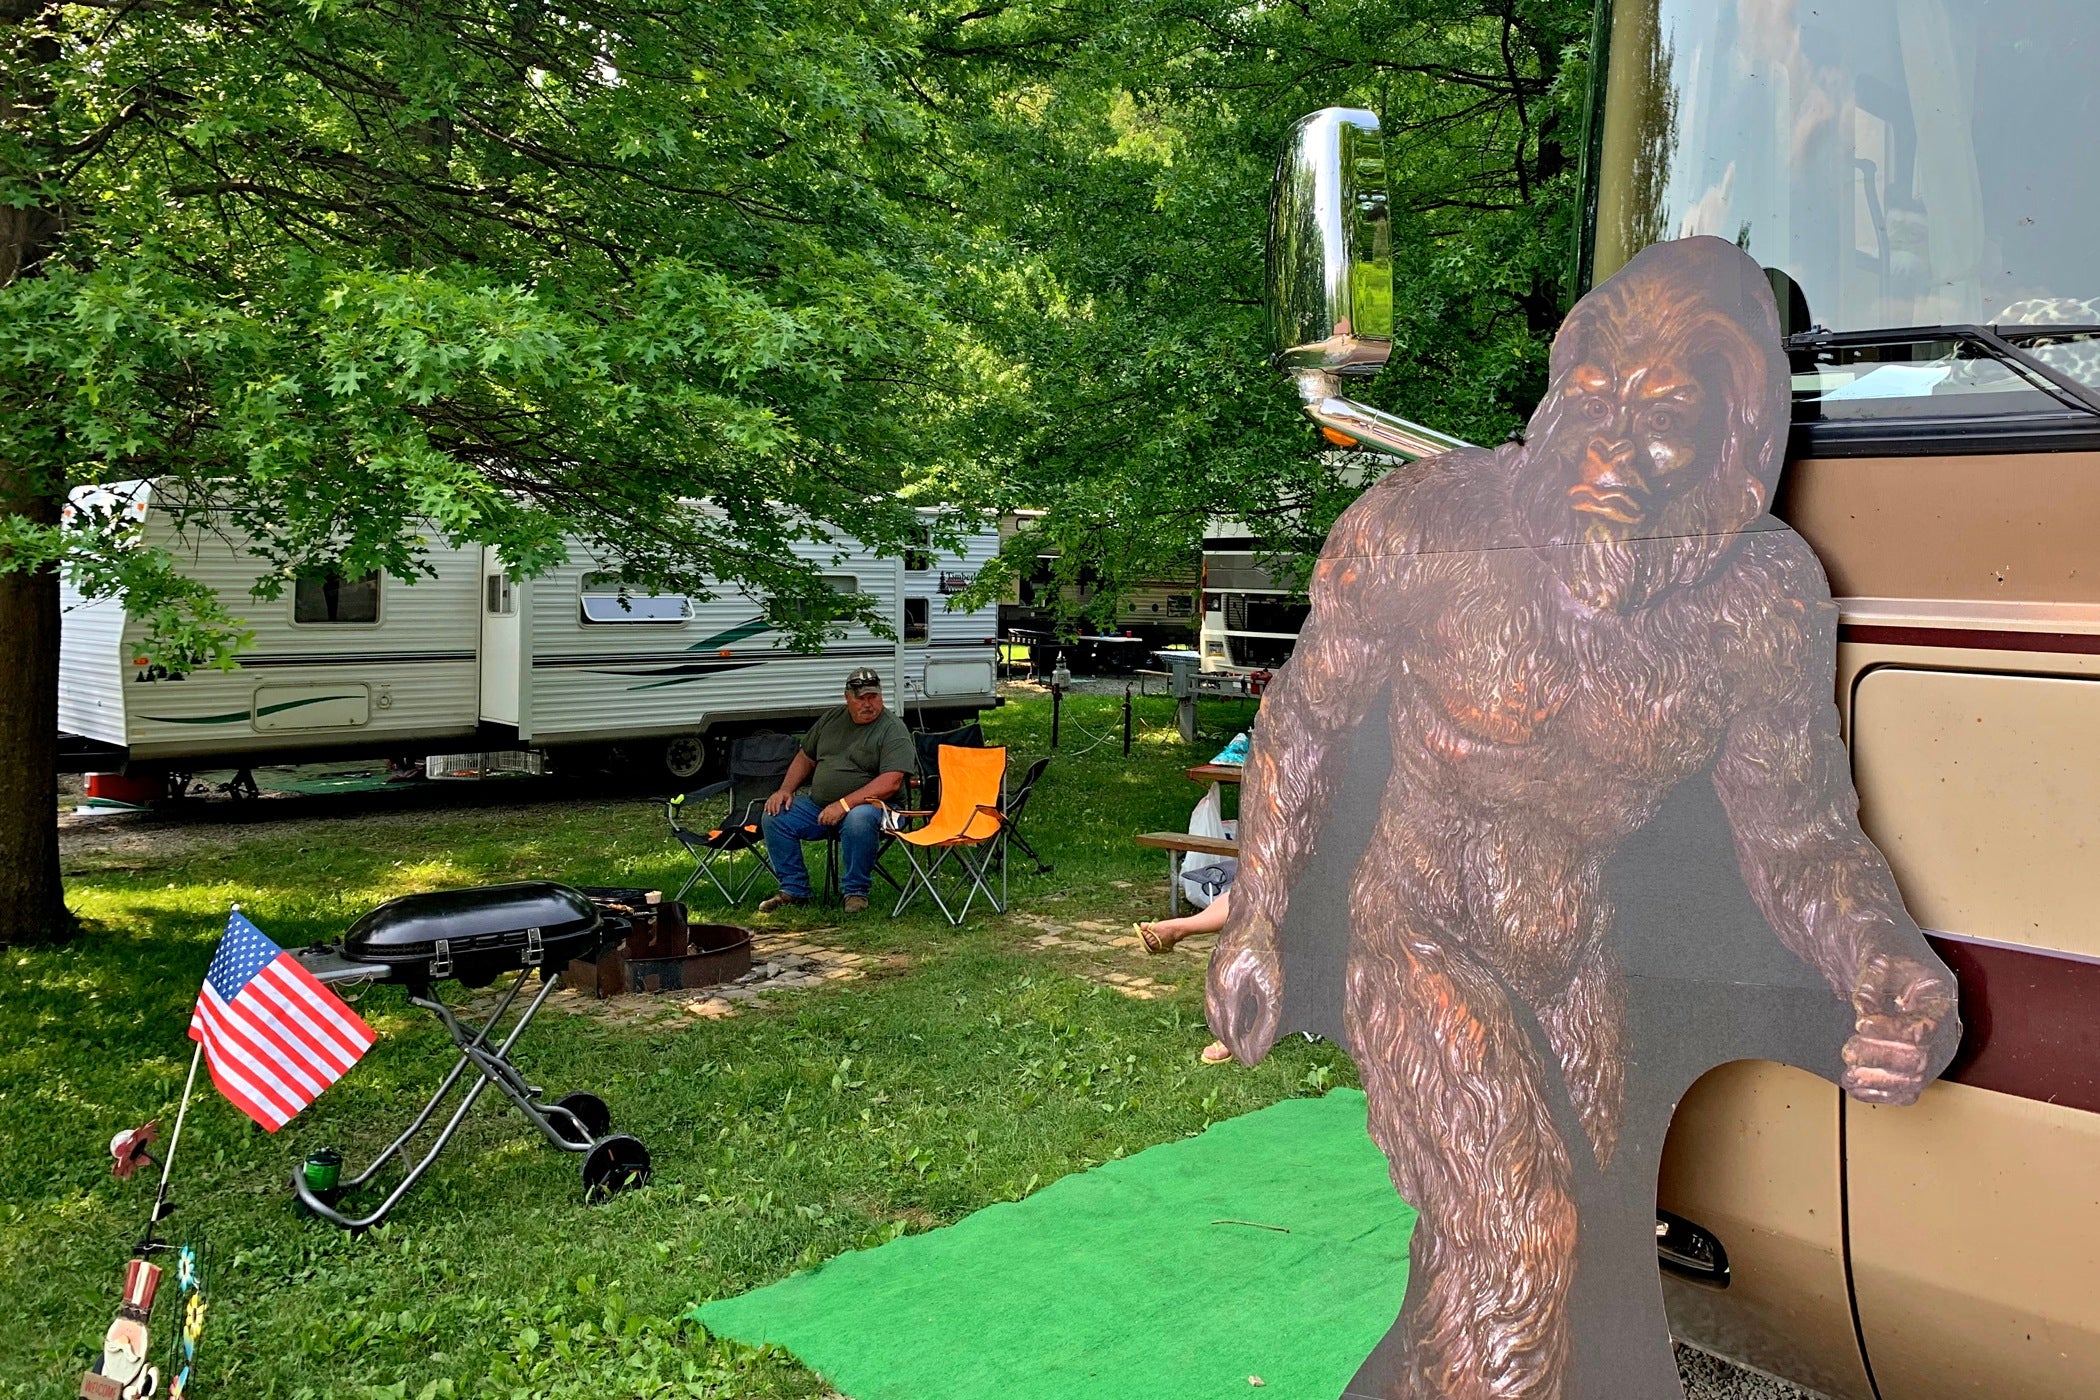 Why so many people are searching for Bigfoot in Pennsylvania WHYY